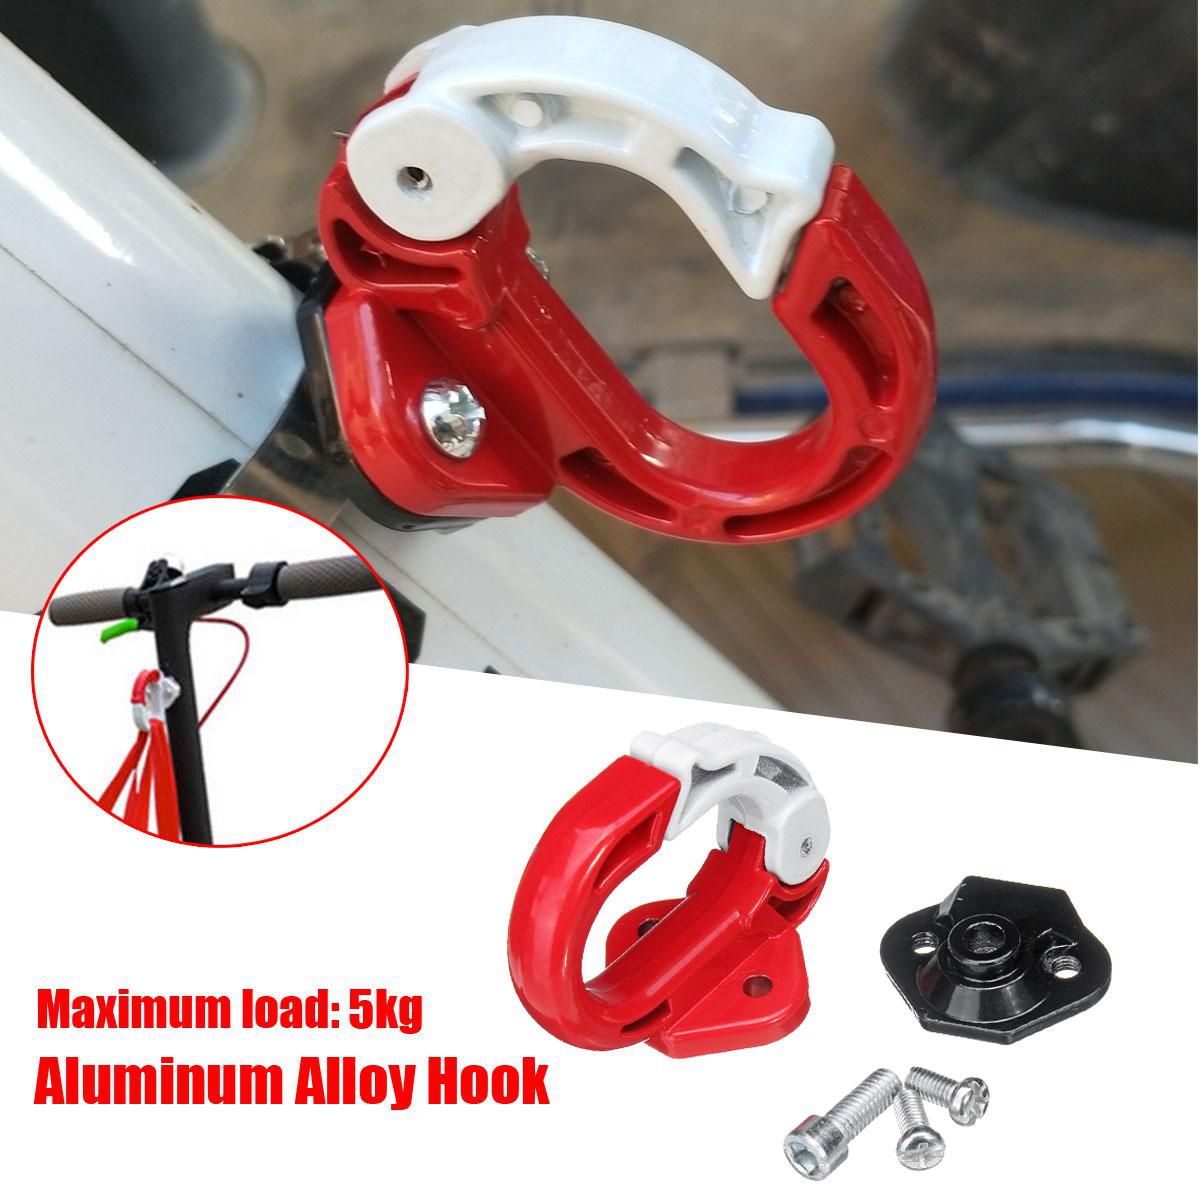 Aluminium Alloy Hook Claw For Xiaomi Mijia M365 Electric Scooter Hanging Bag 